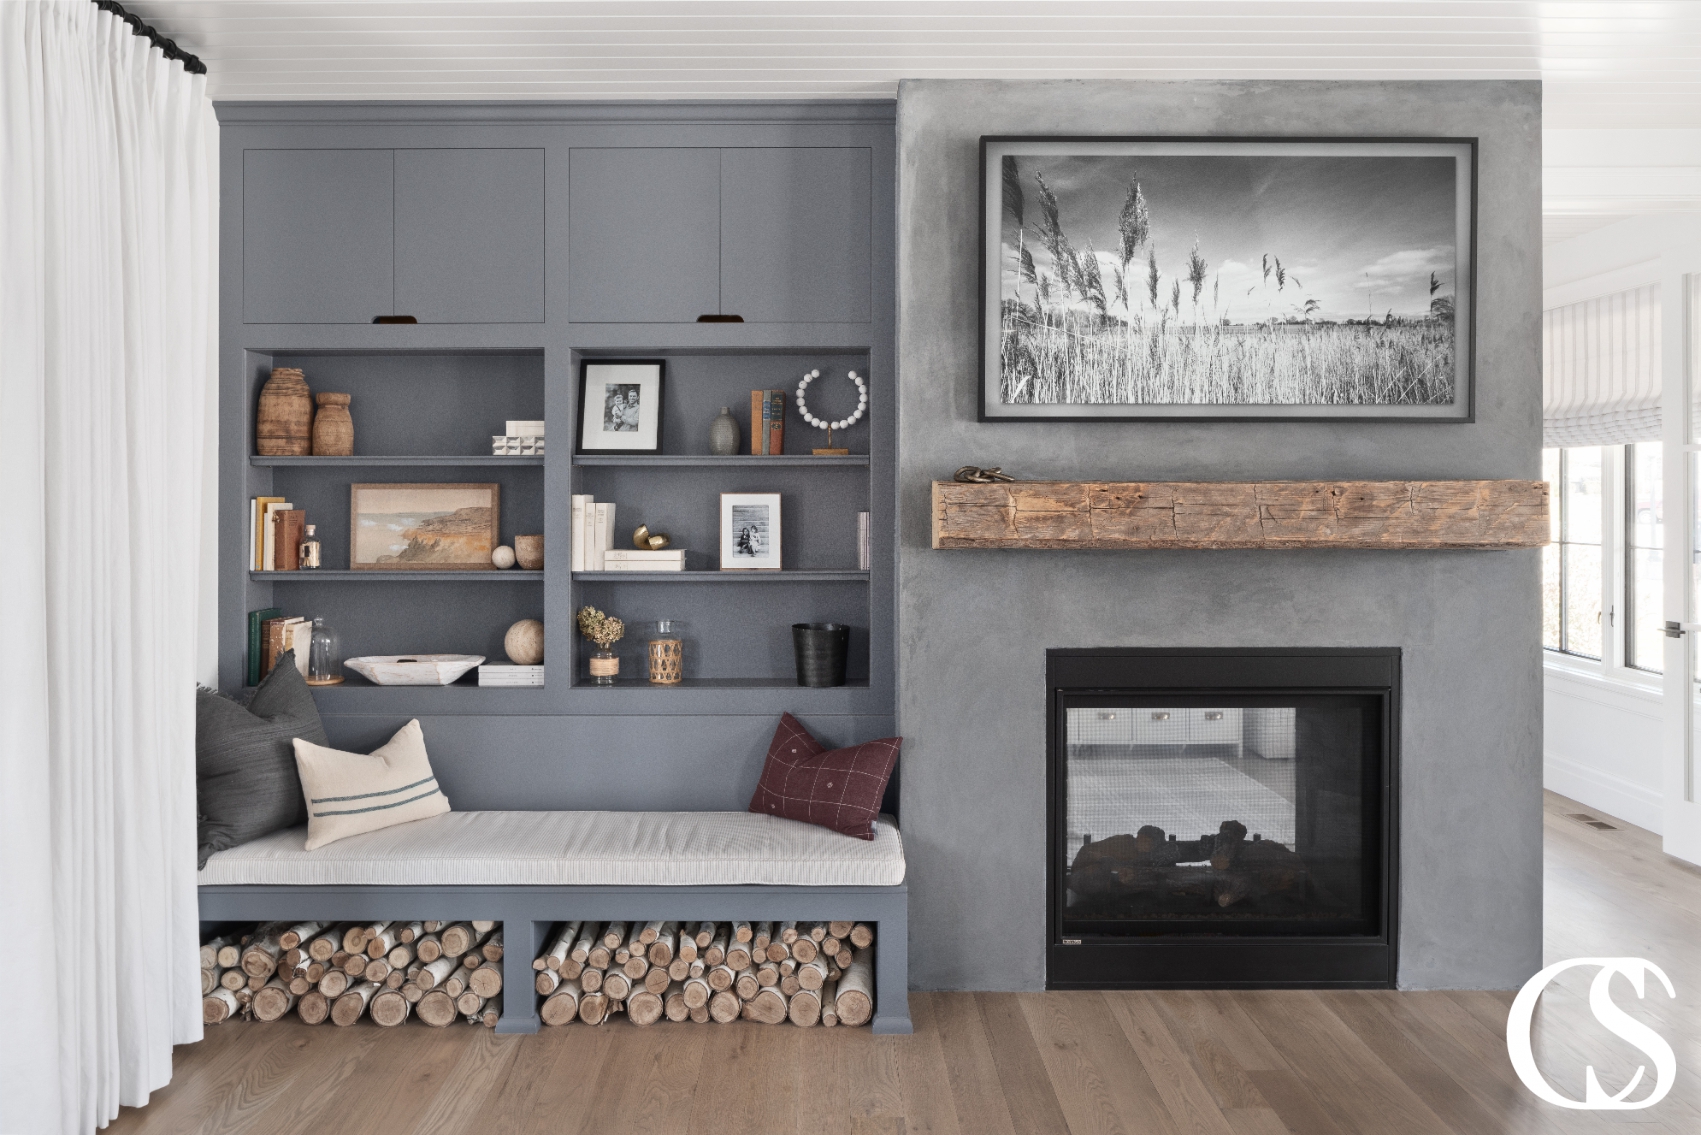 Functional and stylish custom built-in cabinets, designed to maximize storage while fitting seamlessly into the overall design of the room. The cabinet features a mix of open shelving and closed storage options with a gray paintedfinish.